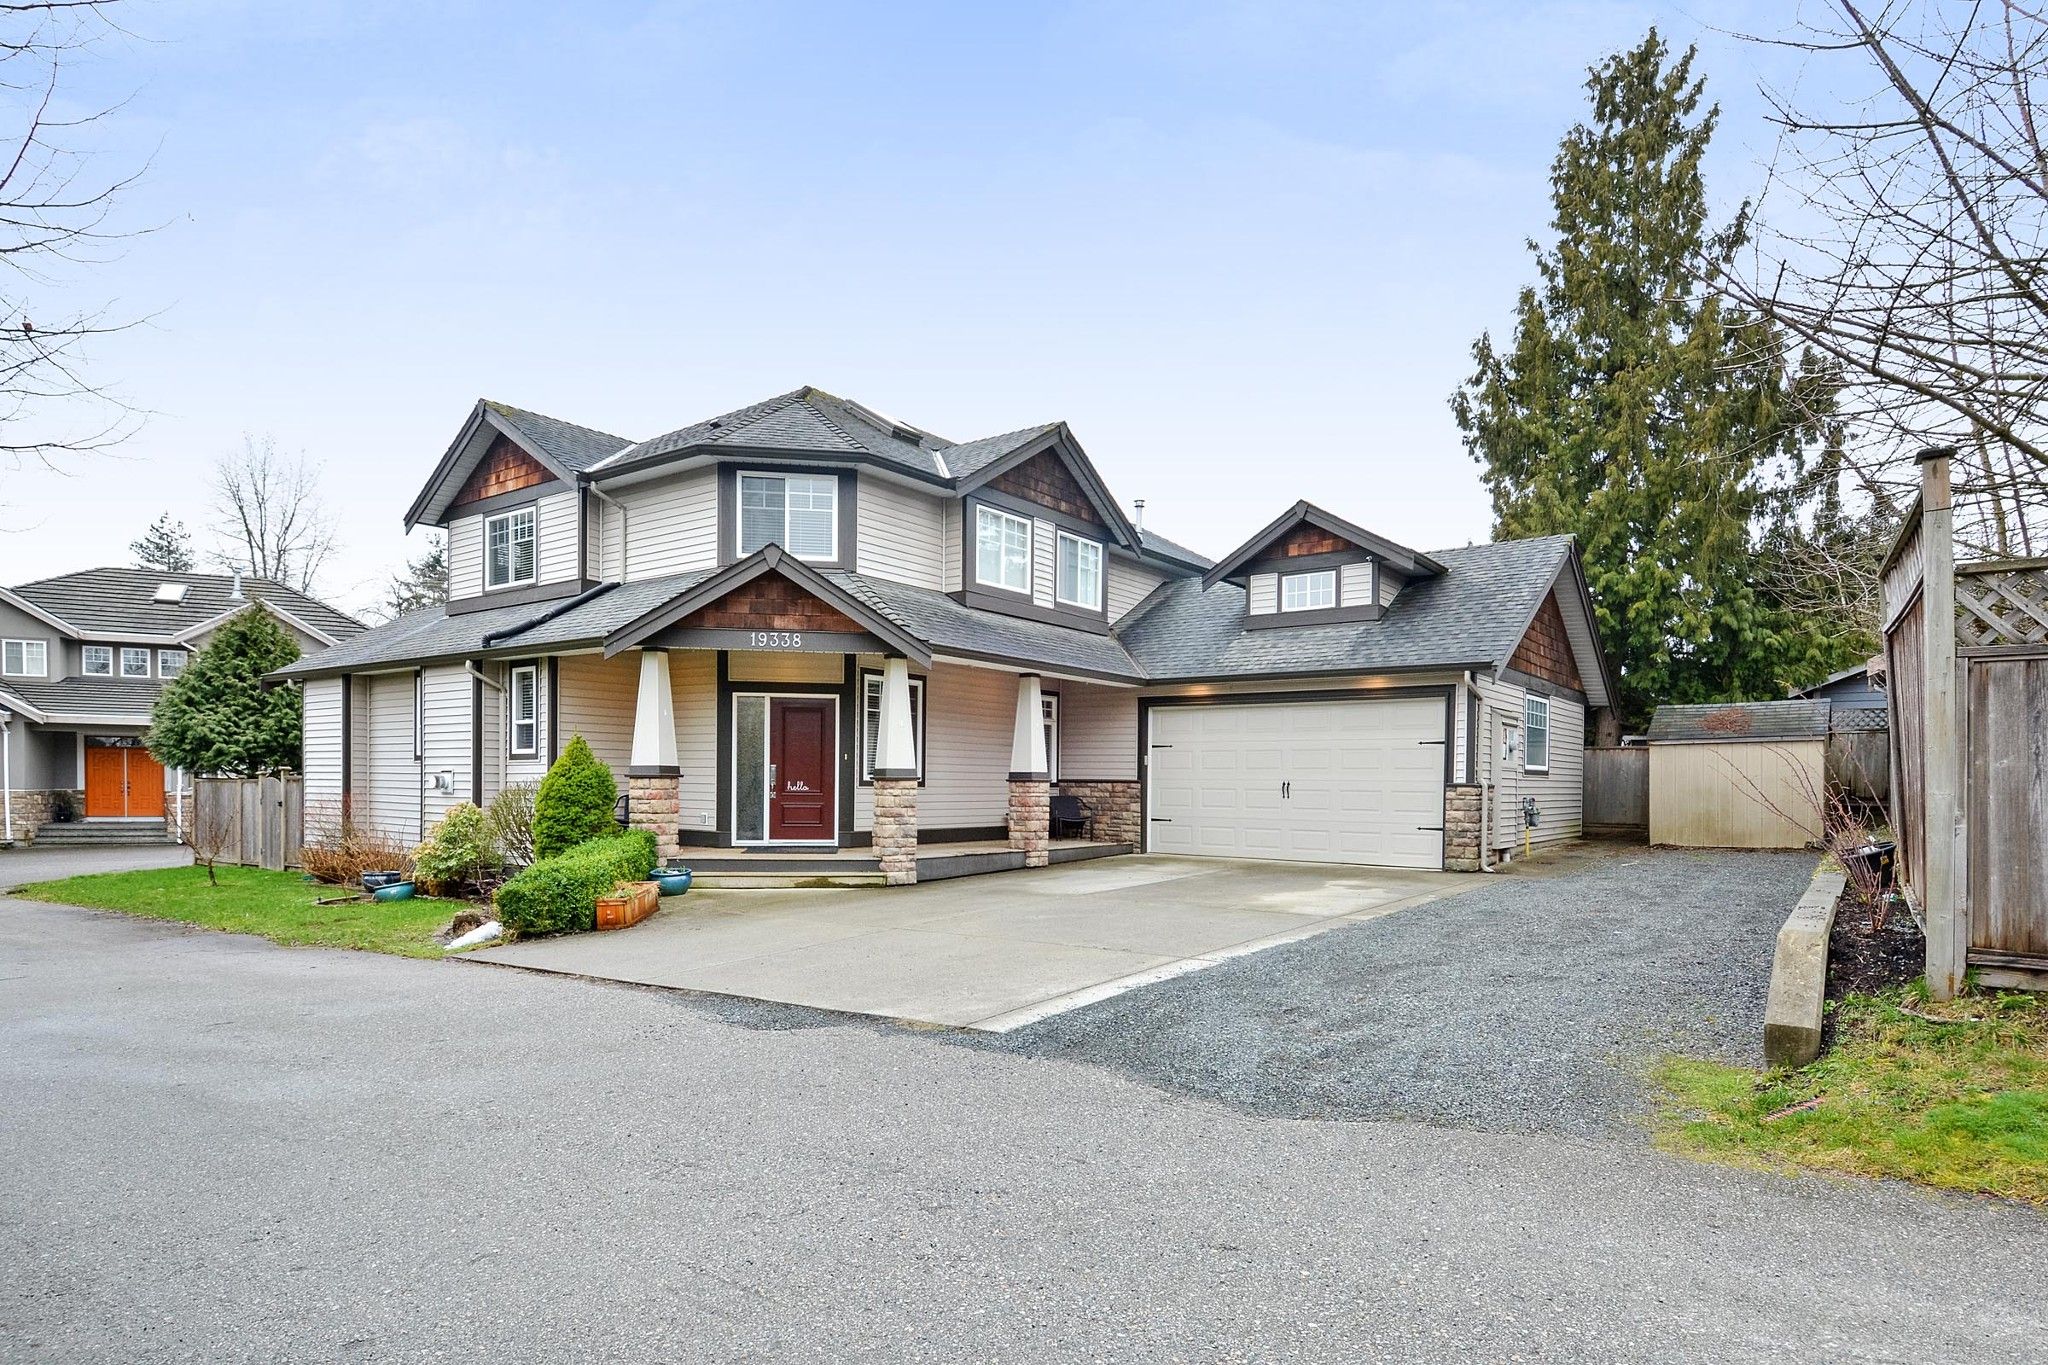 We have sold a property at 19338 63A AVE in Surrey